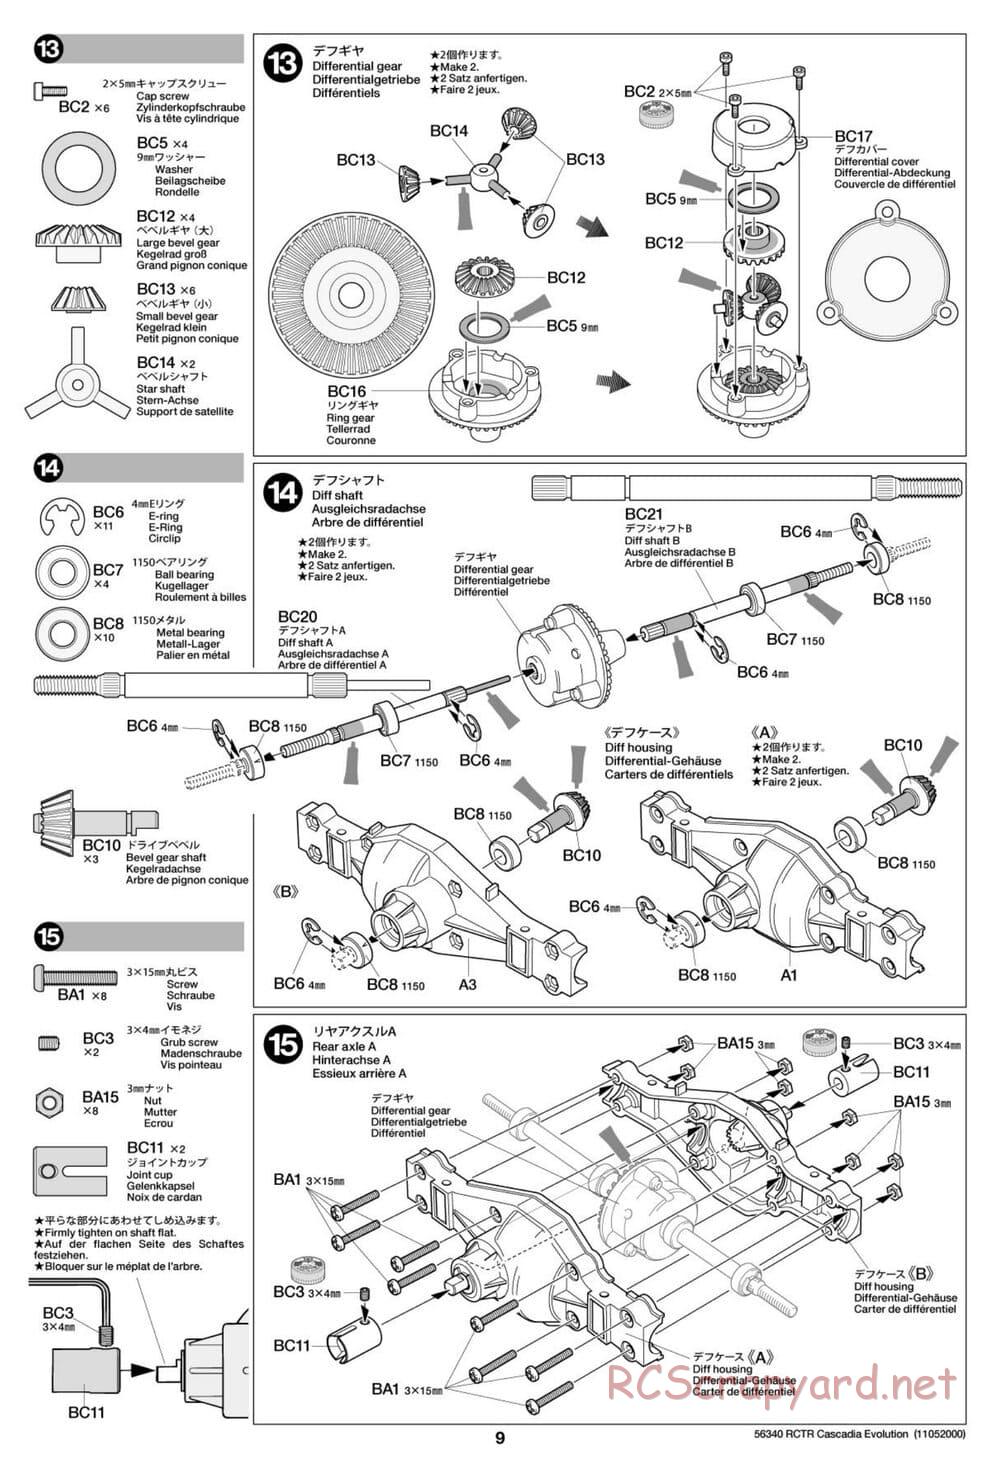 Tamiya - Freightliner Cascadia Evolution Tractor Truck Chassis - Manual - Page 9